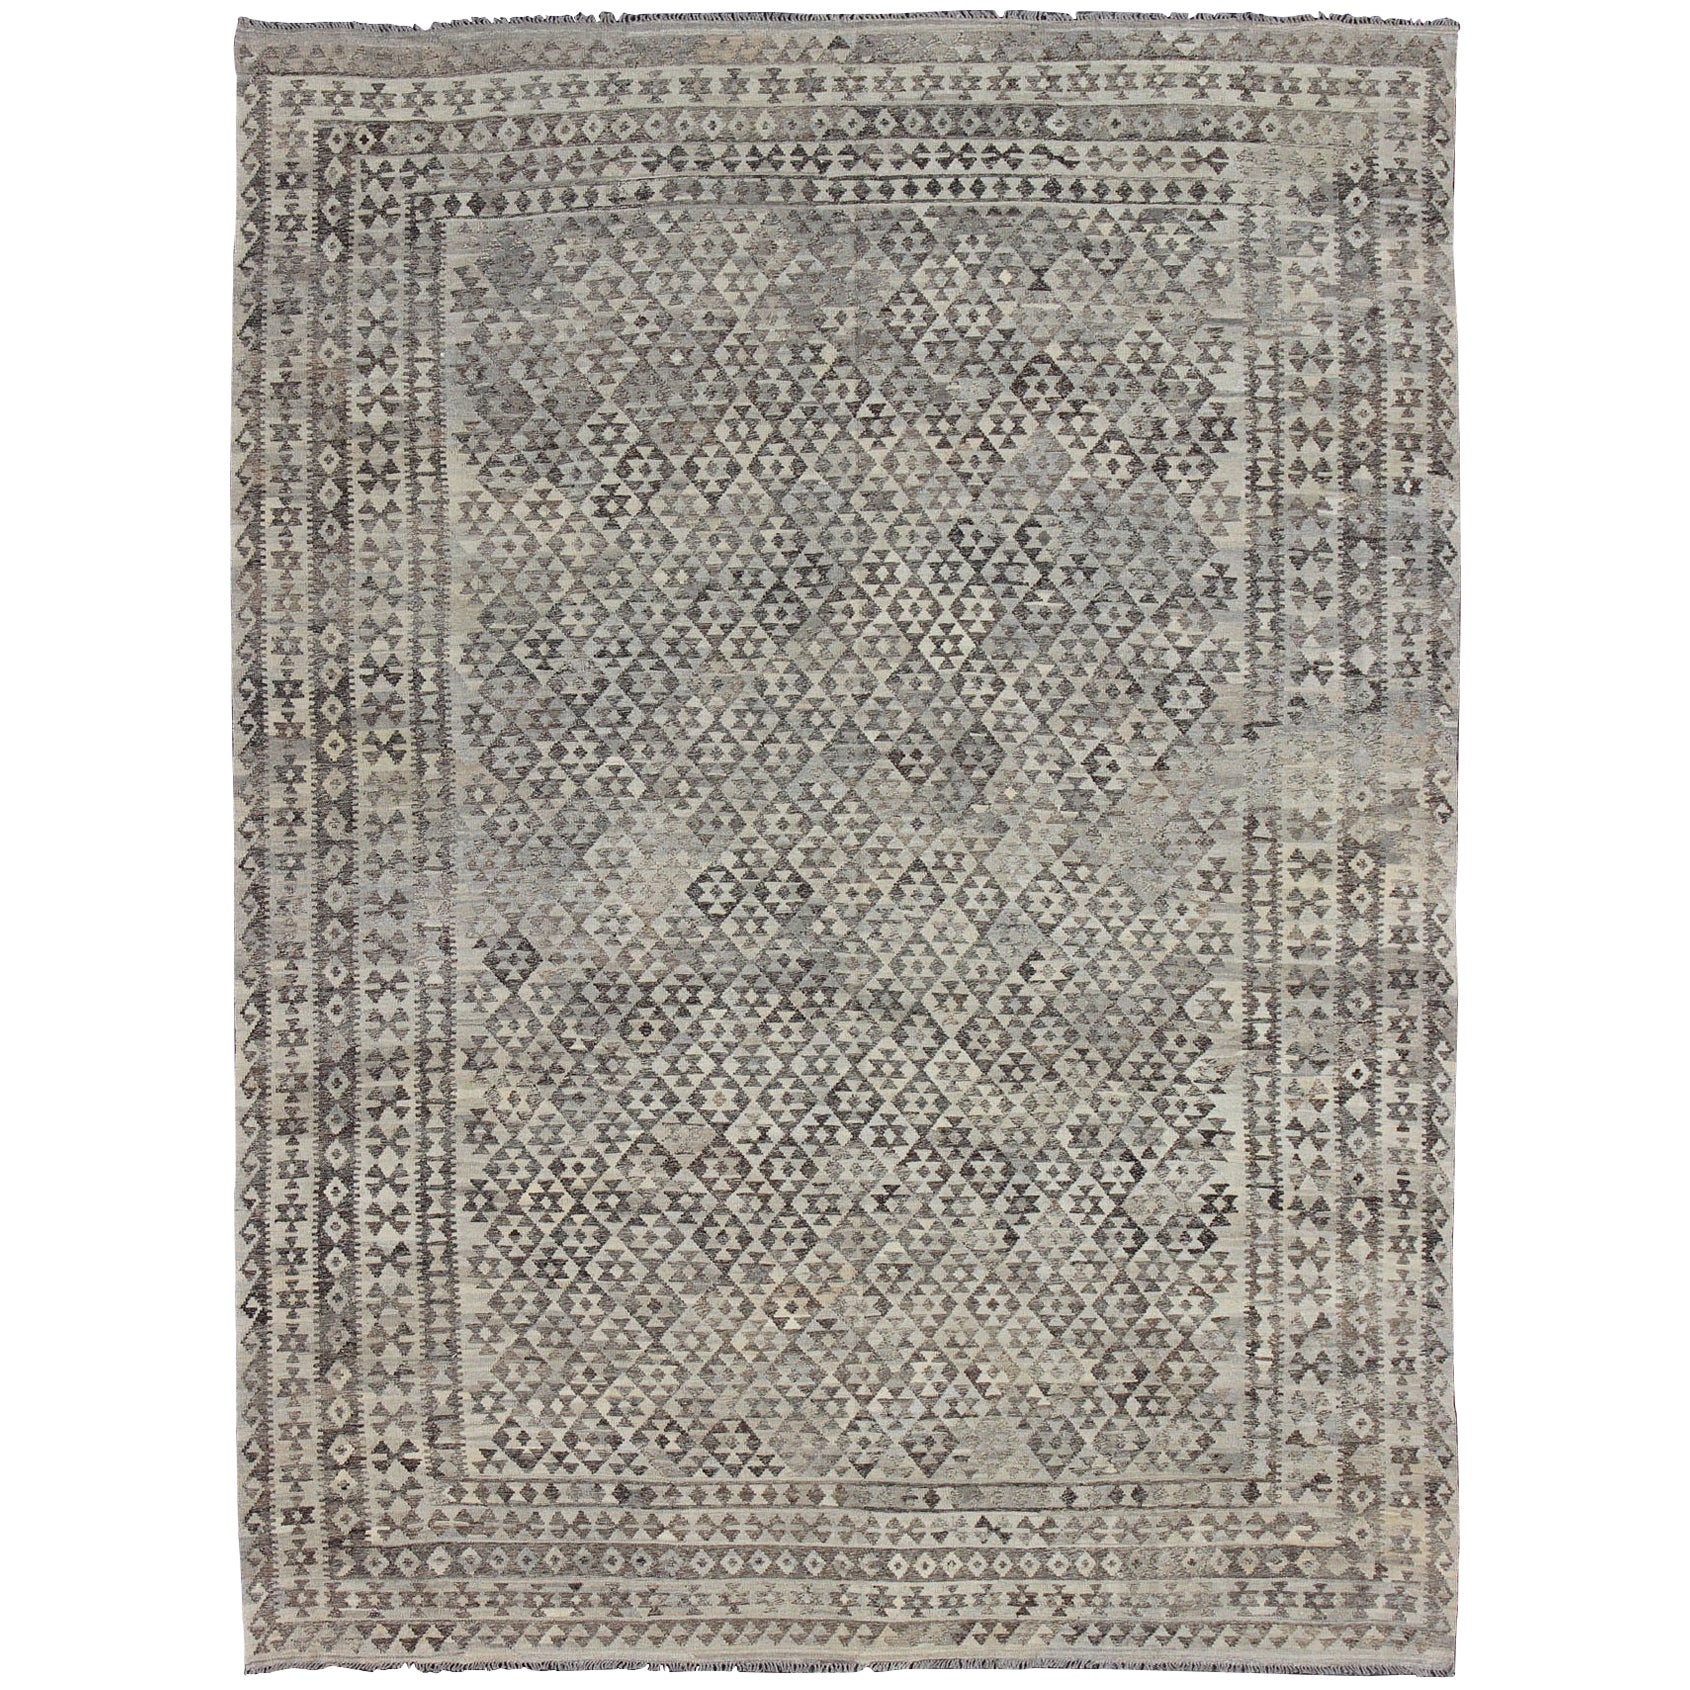 Large Tribal and Modern Kilim in Charcoal, Brown, Silver Blue, Silver and Gray For Sale